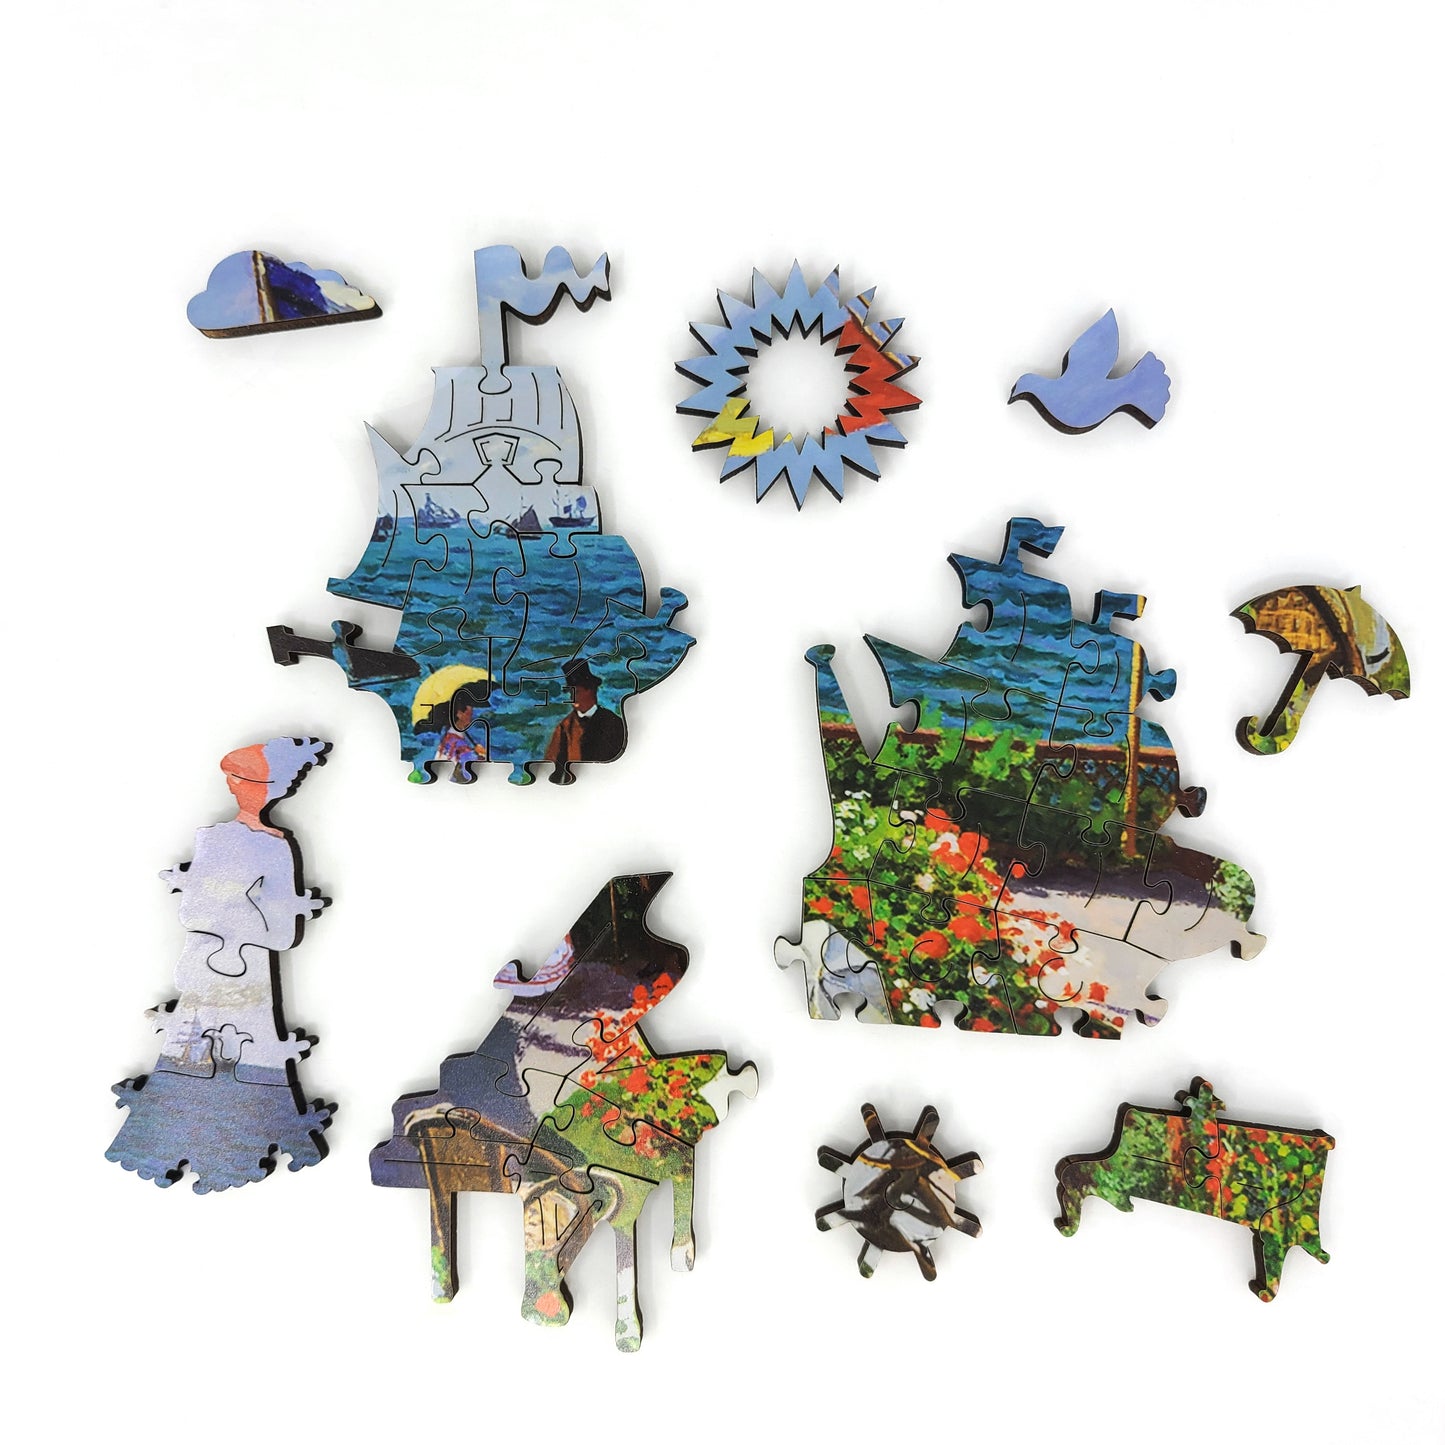 Large Format Wooden Jigsaw Puzzle with Uniquely Shaped Pieces for Seniors and Adults - 205 Pieces - The Garden at Sainte-Adresse